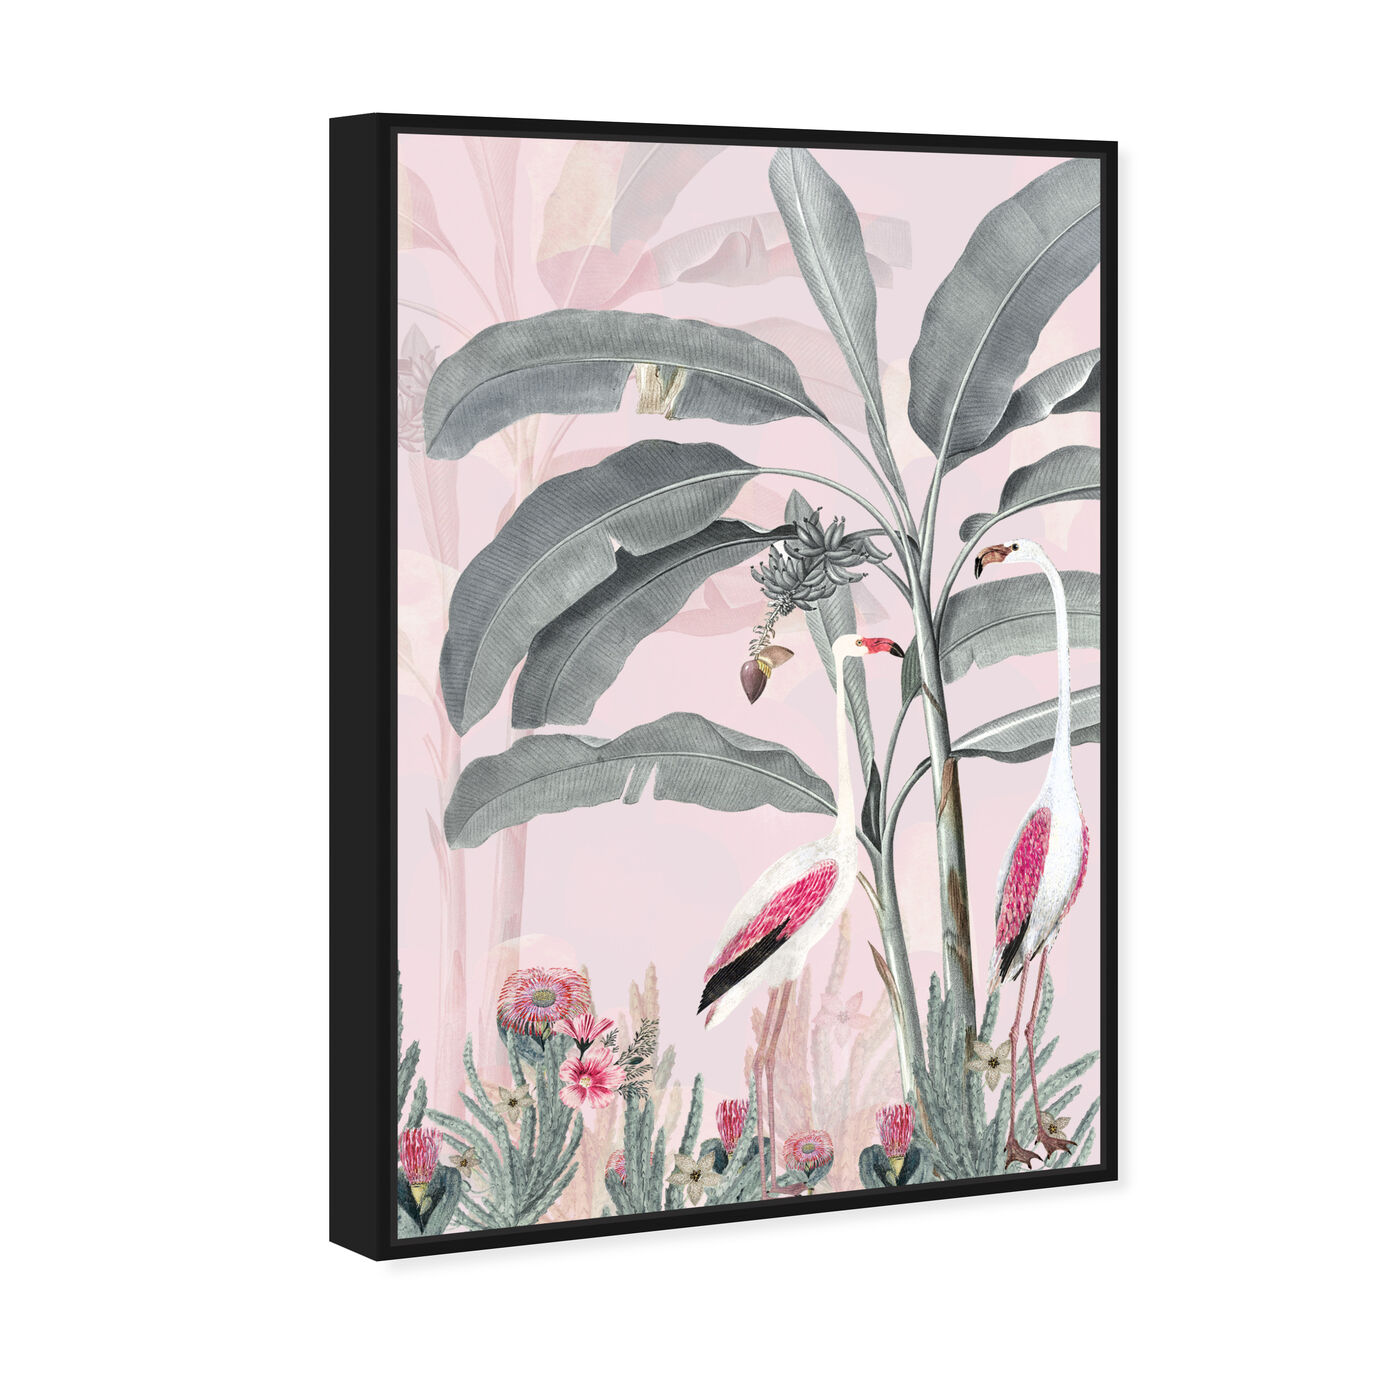 Angled view of Flamingo Pink featuring animals and birds art.